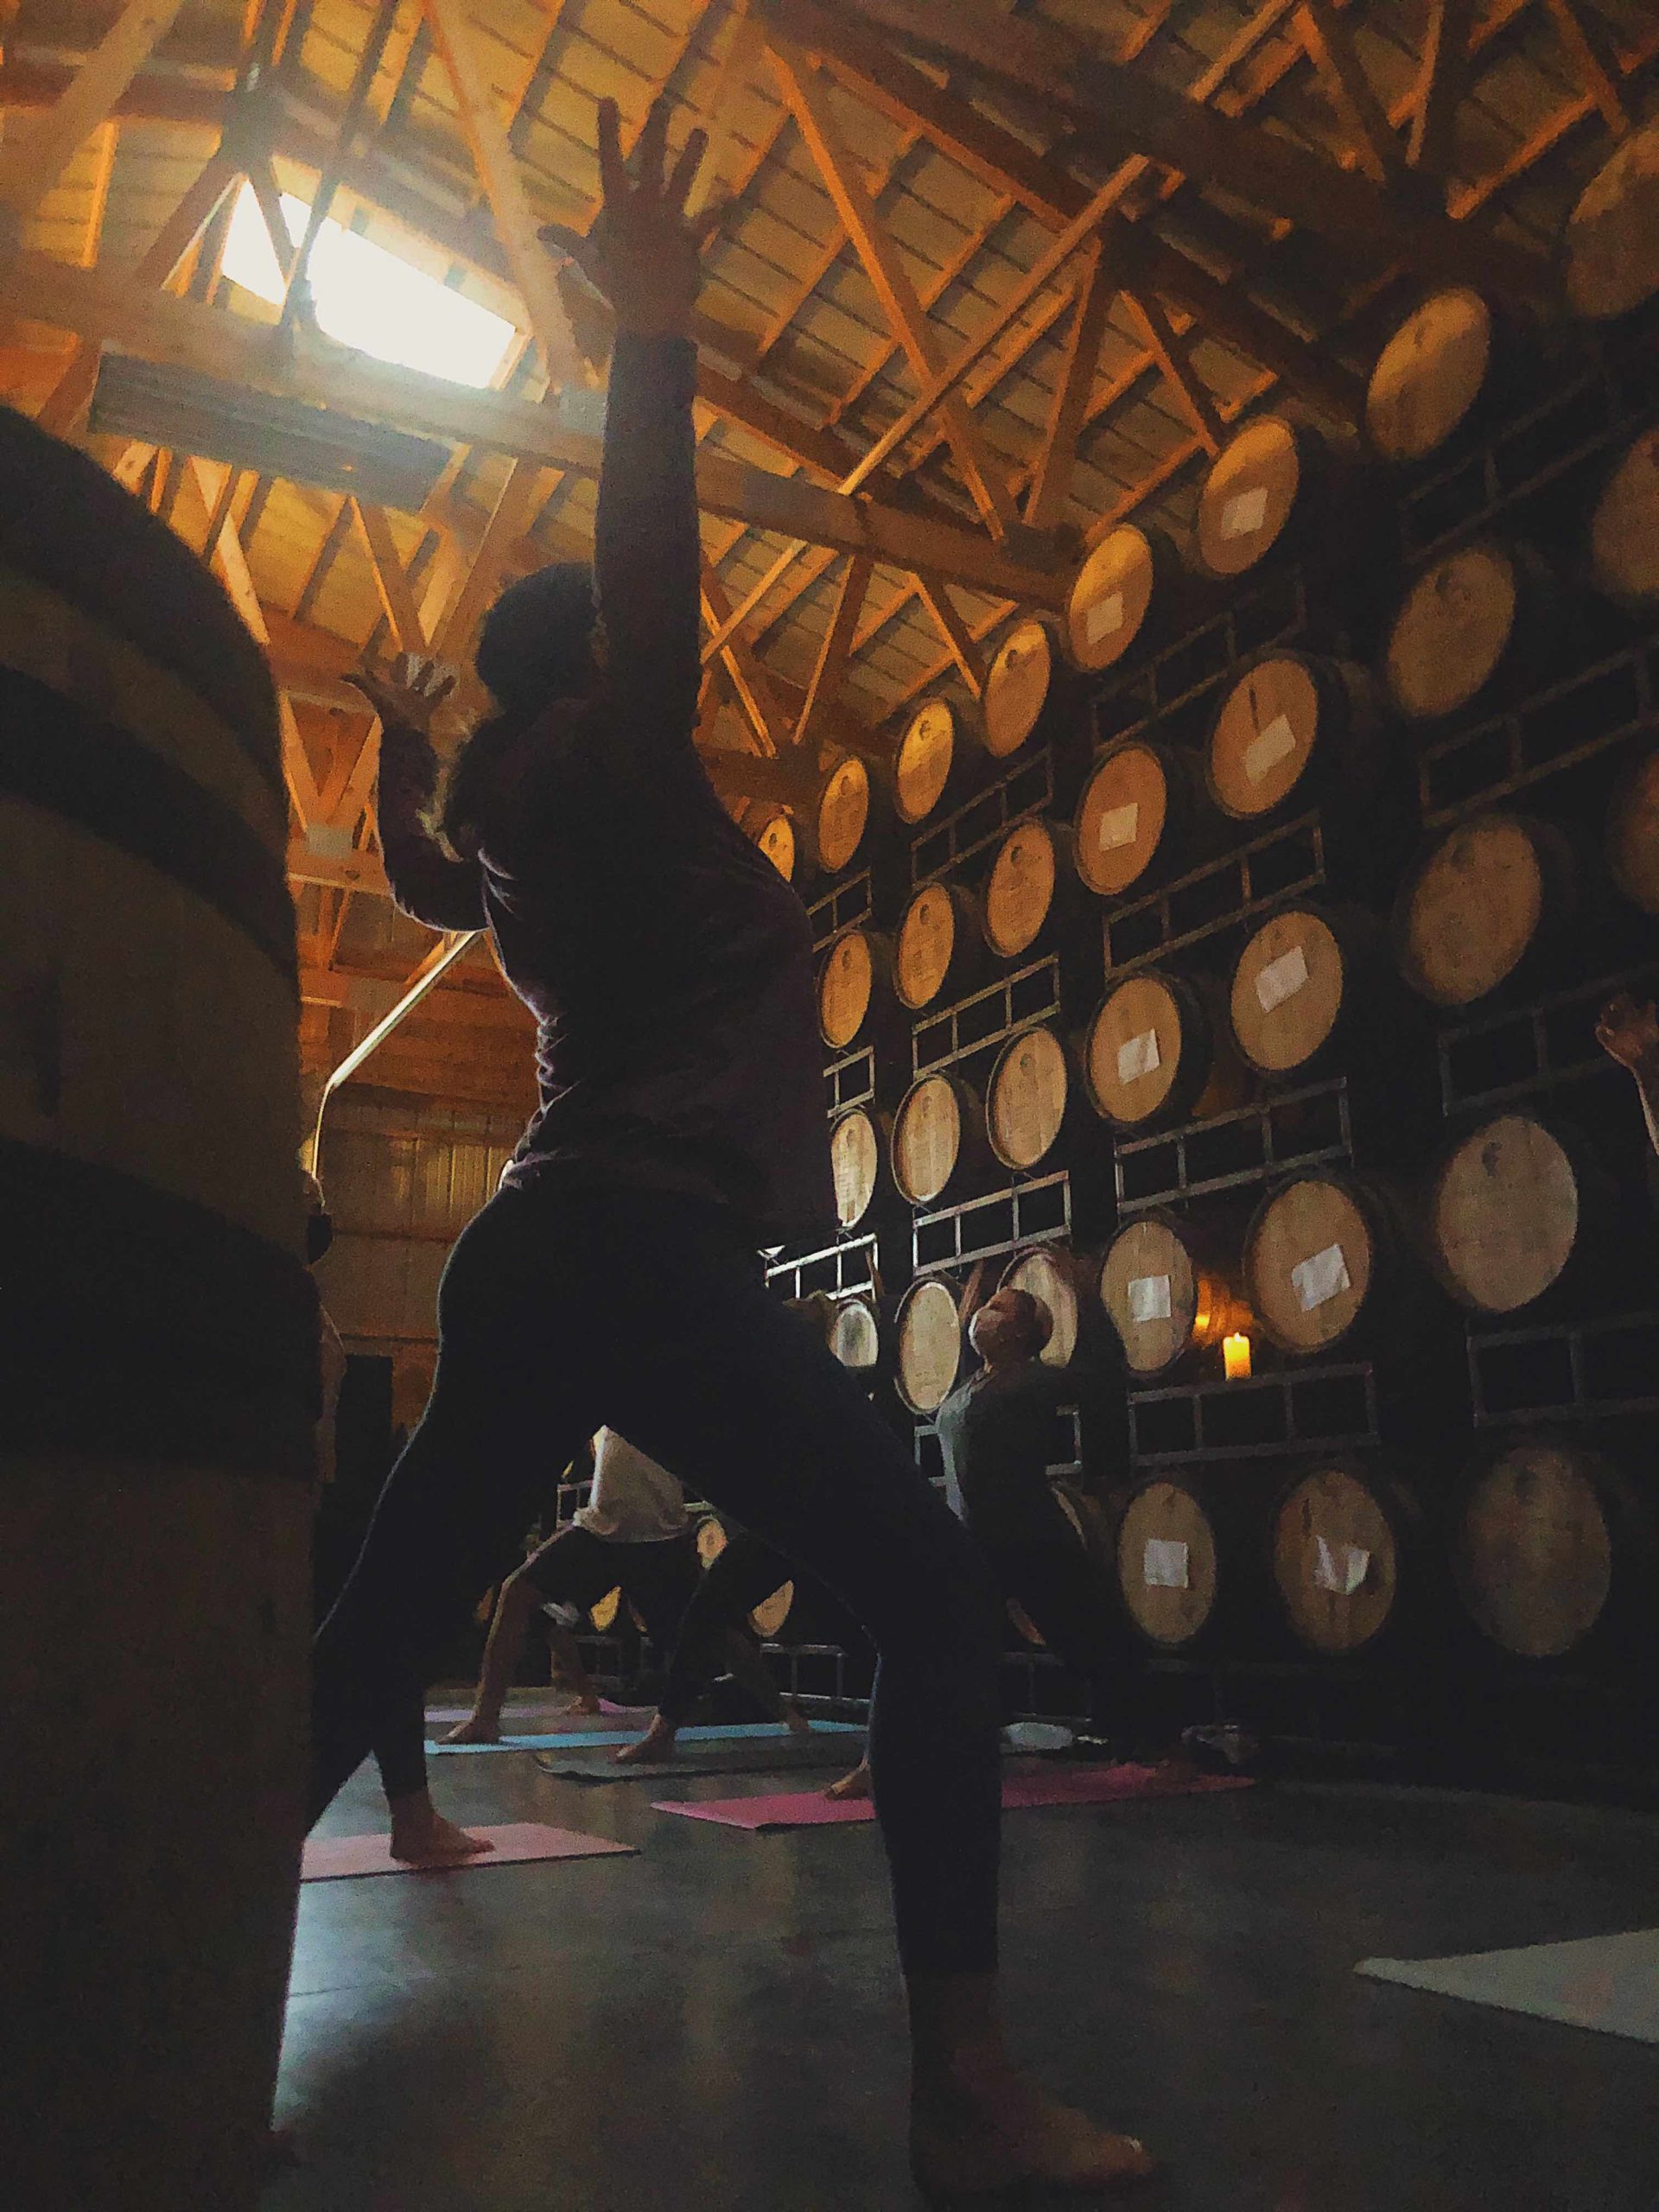 Yoga & Whiskey participants stretch and relax during in the rackhouse, surrounded by barrels of whiskey